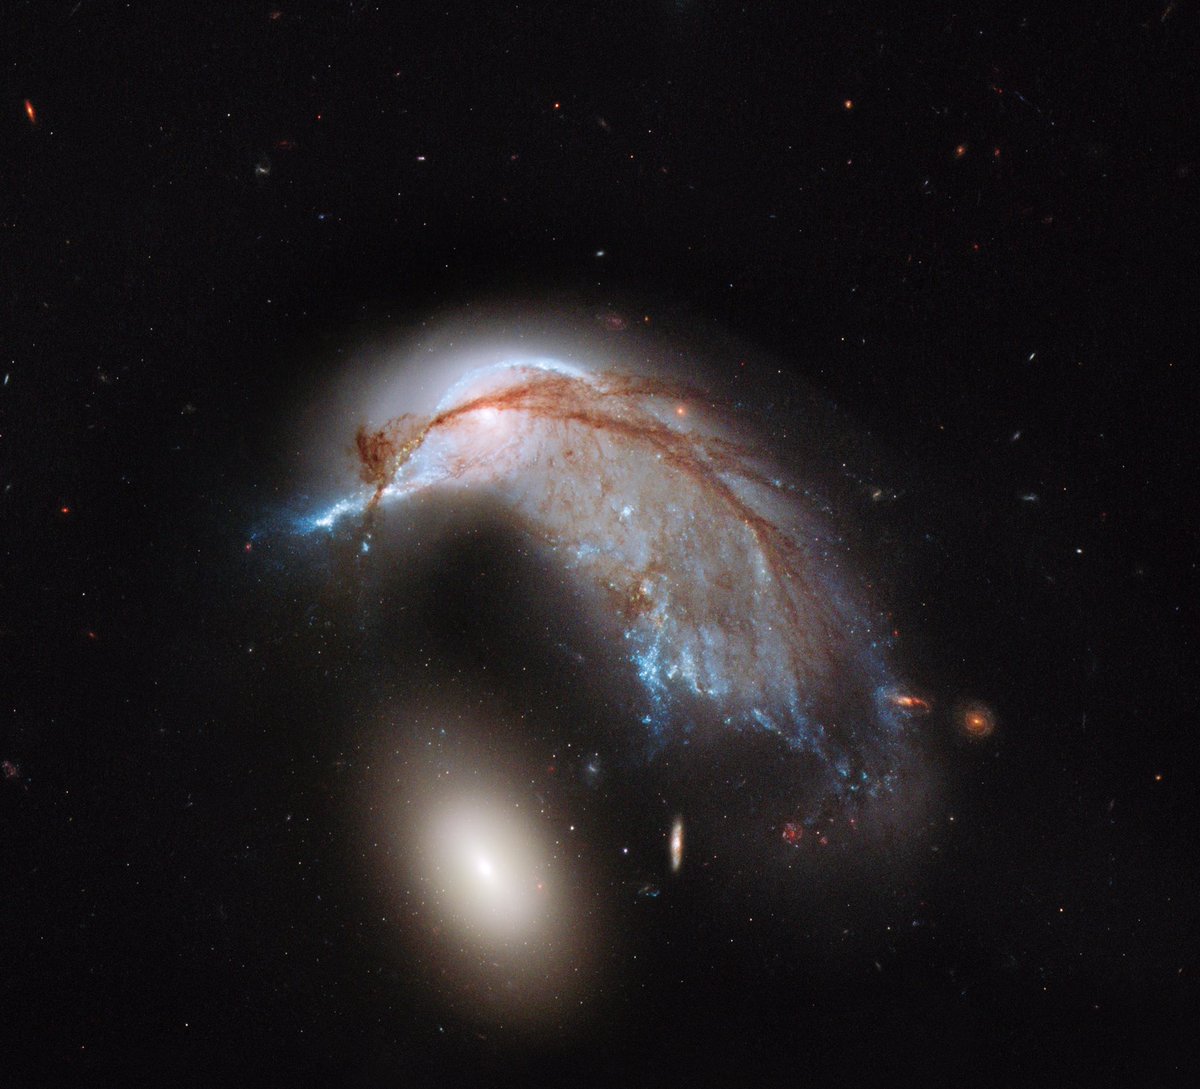 Speaking of Halton Arp’s catalog of peculiar galaxies, the pair Arp 142 is about 326 million light years from Earth. Wildly deformed galaxy NGC 2936 is often called the “Porpoise Galaxy.” Imo it looks more like a hummingbird.Image: NASA, ESA, Hubble Heritage Team (STScI/AURA)